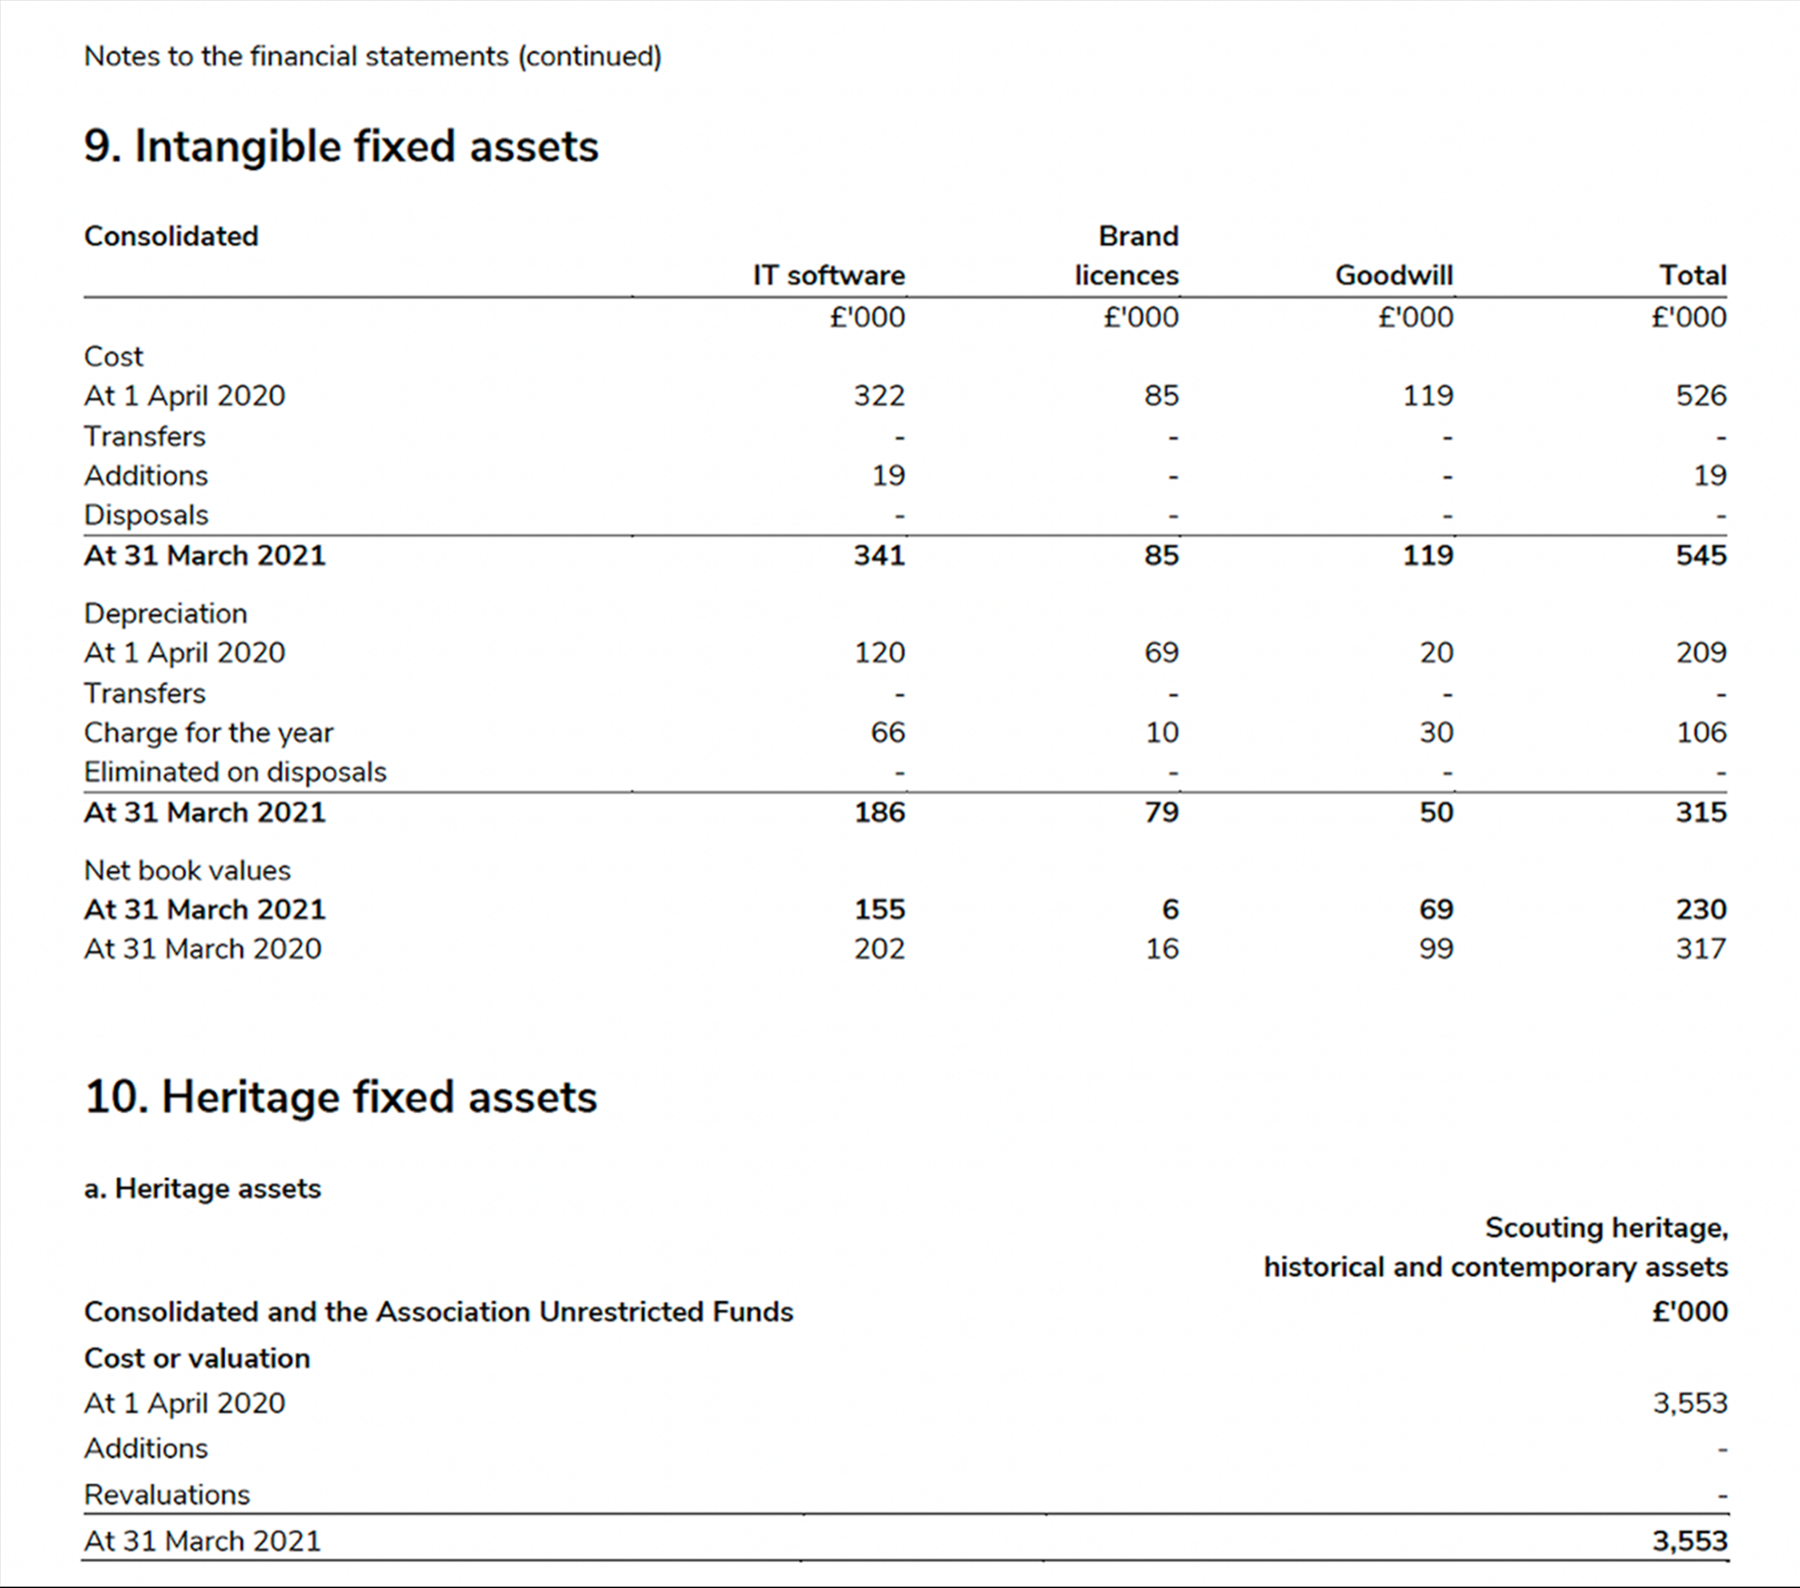 Intangible fixed assets and heritage assets